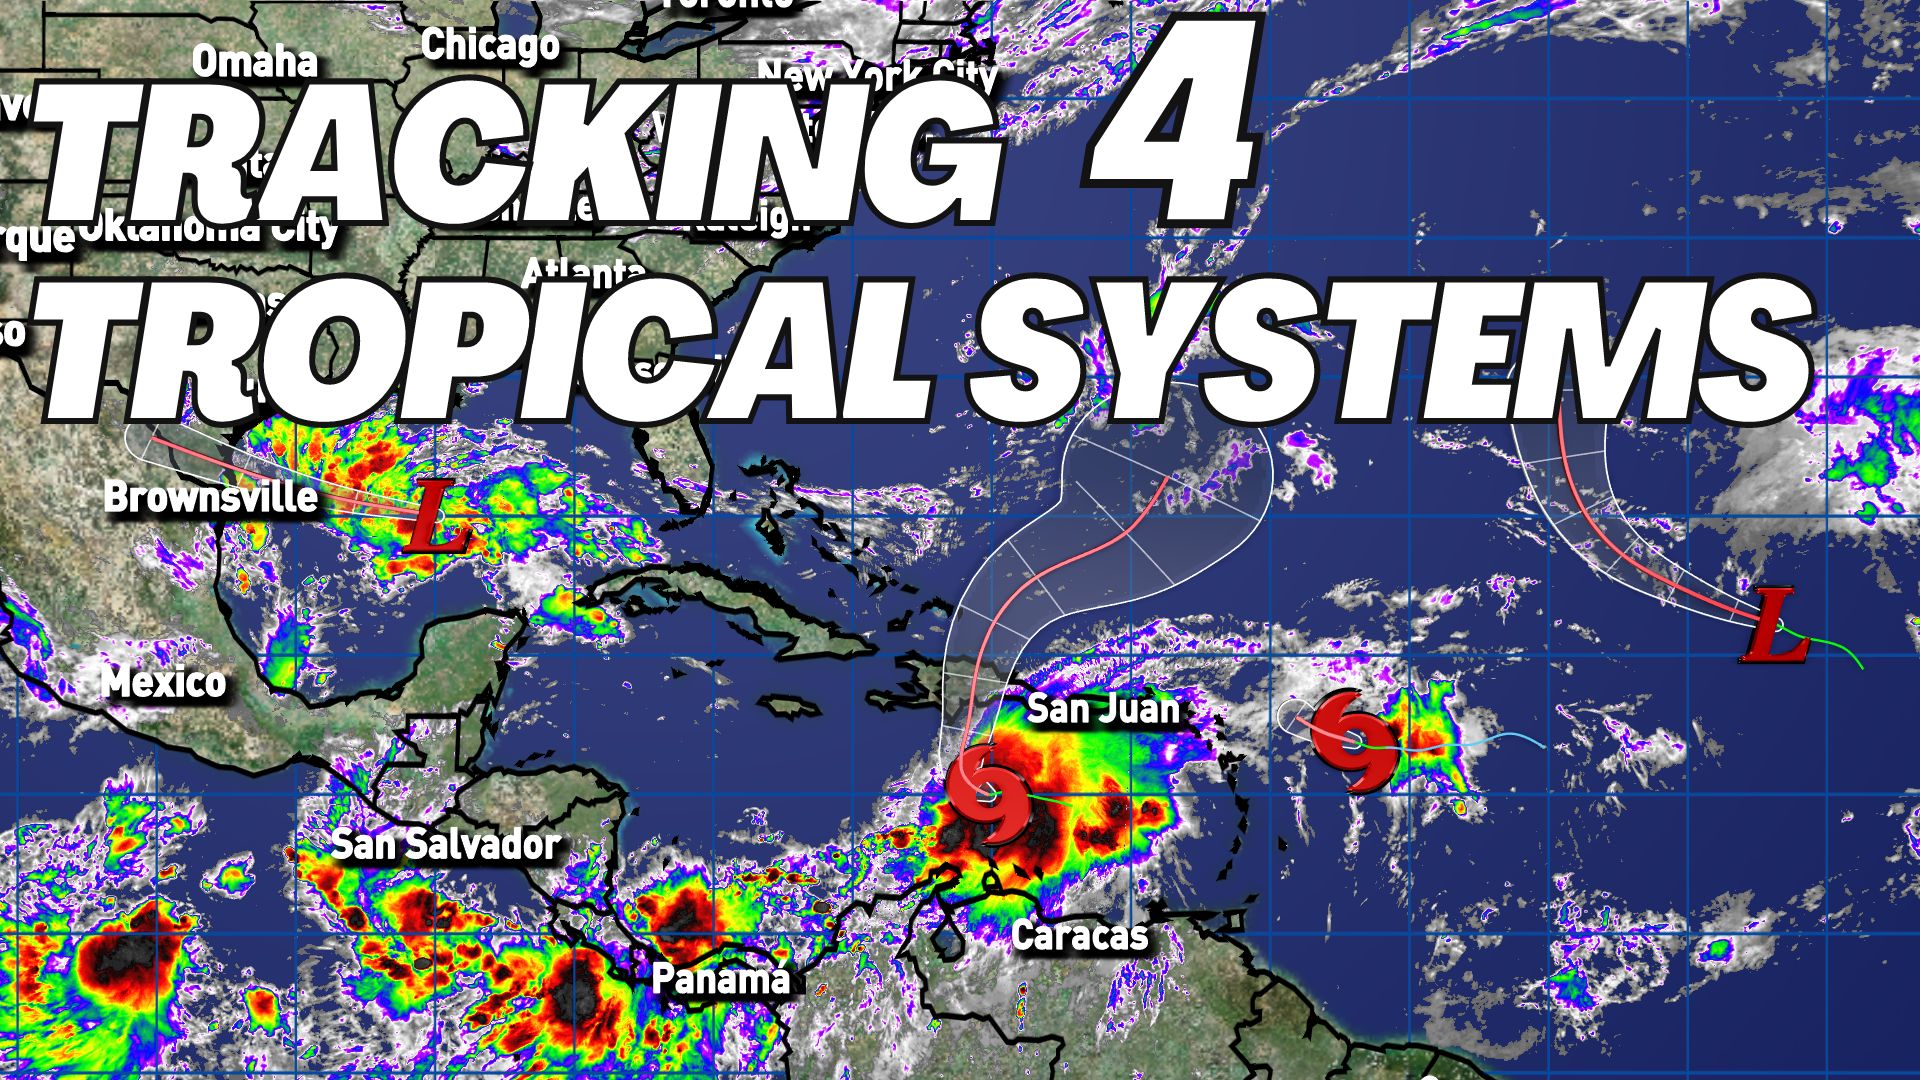 We are tracking 4 tropical systems, including one heading towards 